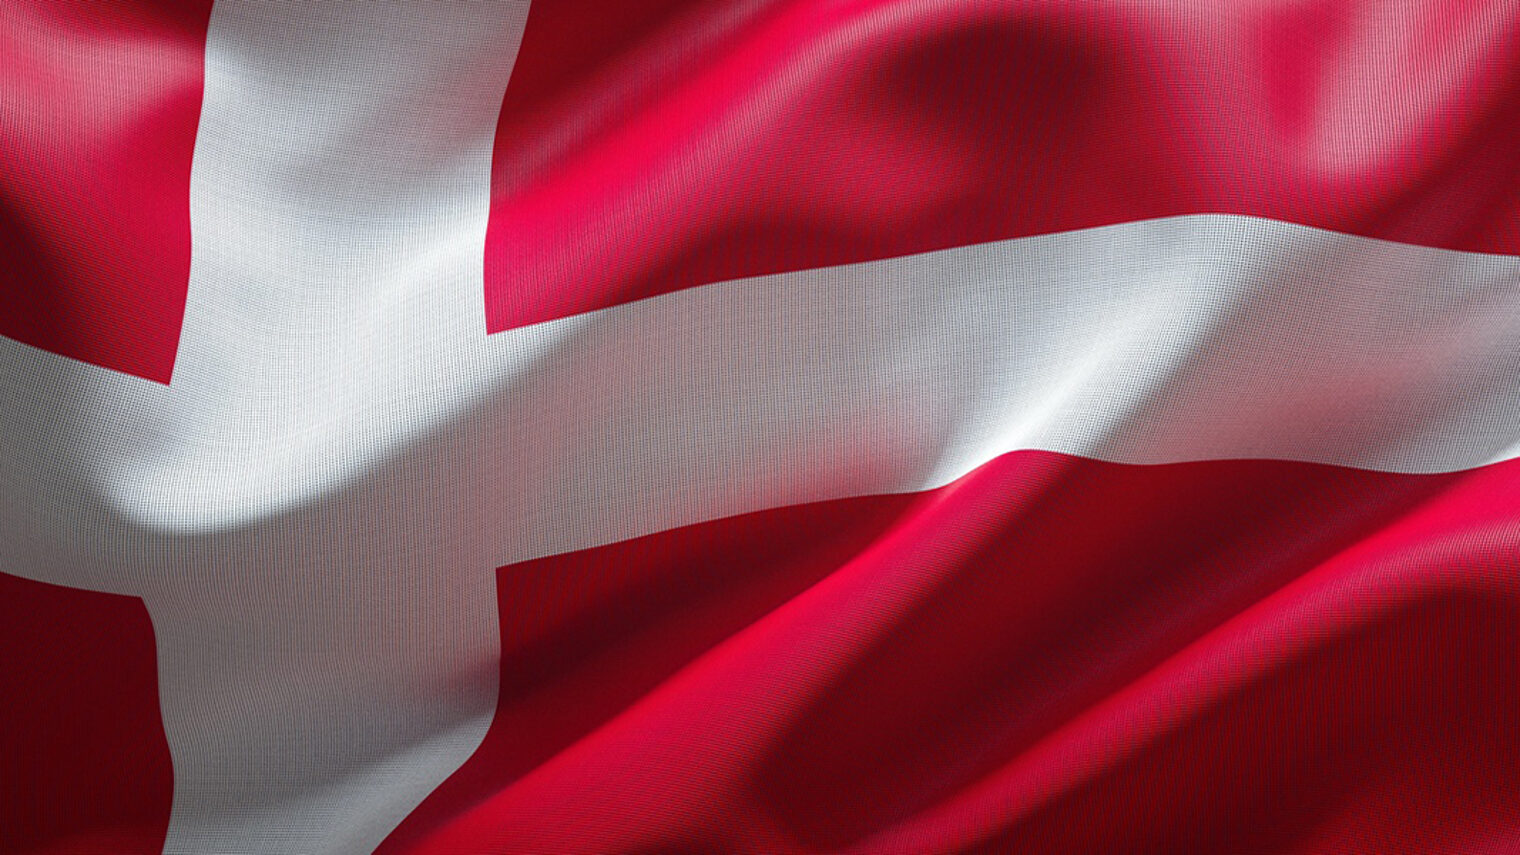 flag, national, denmark, cloth, real fabric, textile, danish, fabric, close-up, real, fluttering, curves, air, homeland, nation, europe, european union, copenhagen, pride, country, north, fastelavn, walpurgis, store bededag, christianshavn, shield, cross, parliamentary monarchy, constitution, red, symbol, white, silk, banner, satin, waving, union, background, seward, our, tradition, velvet, great background